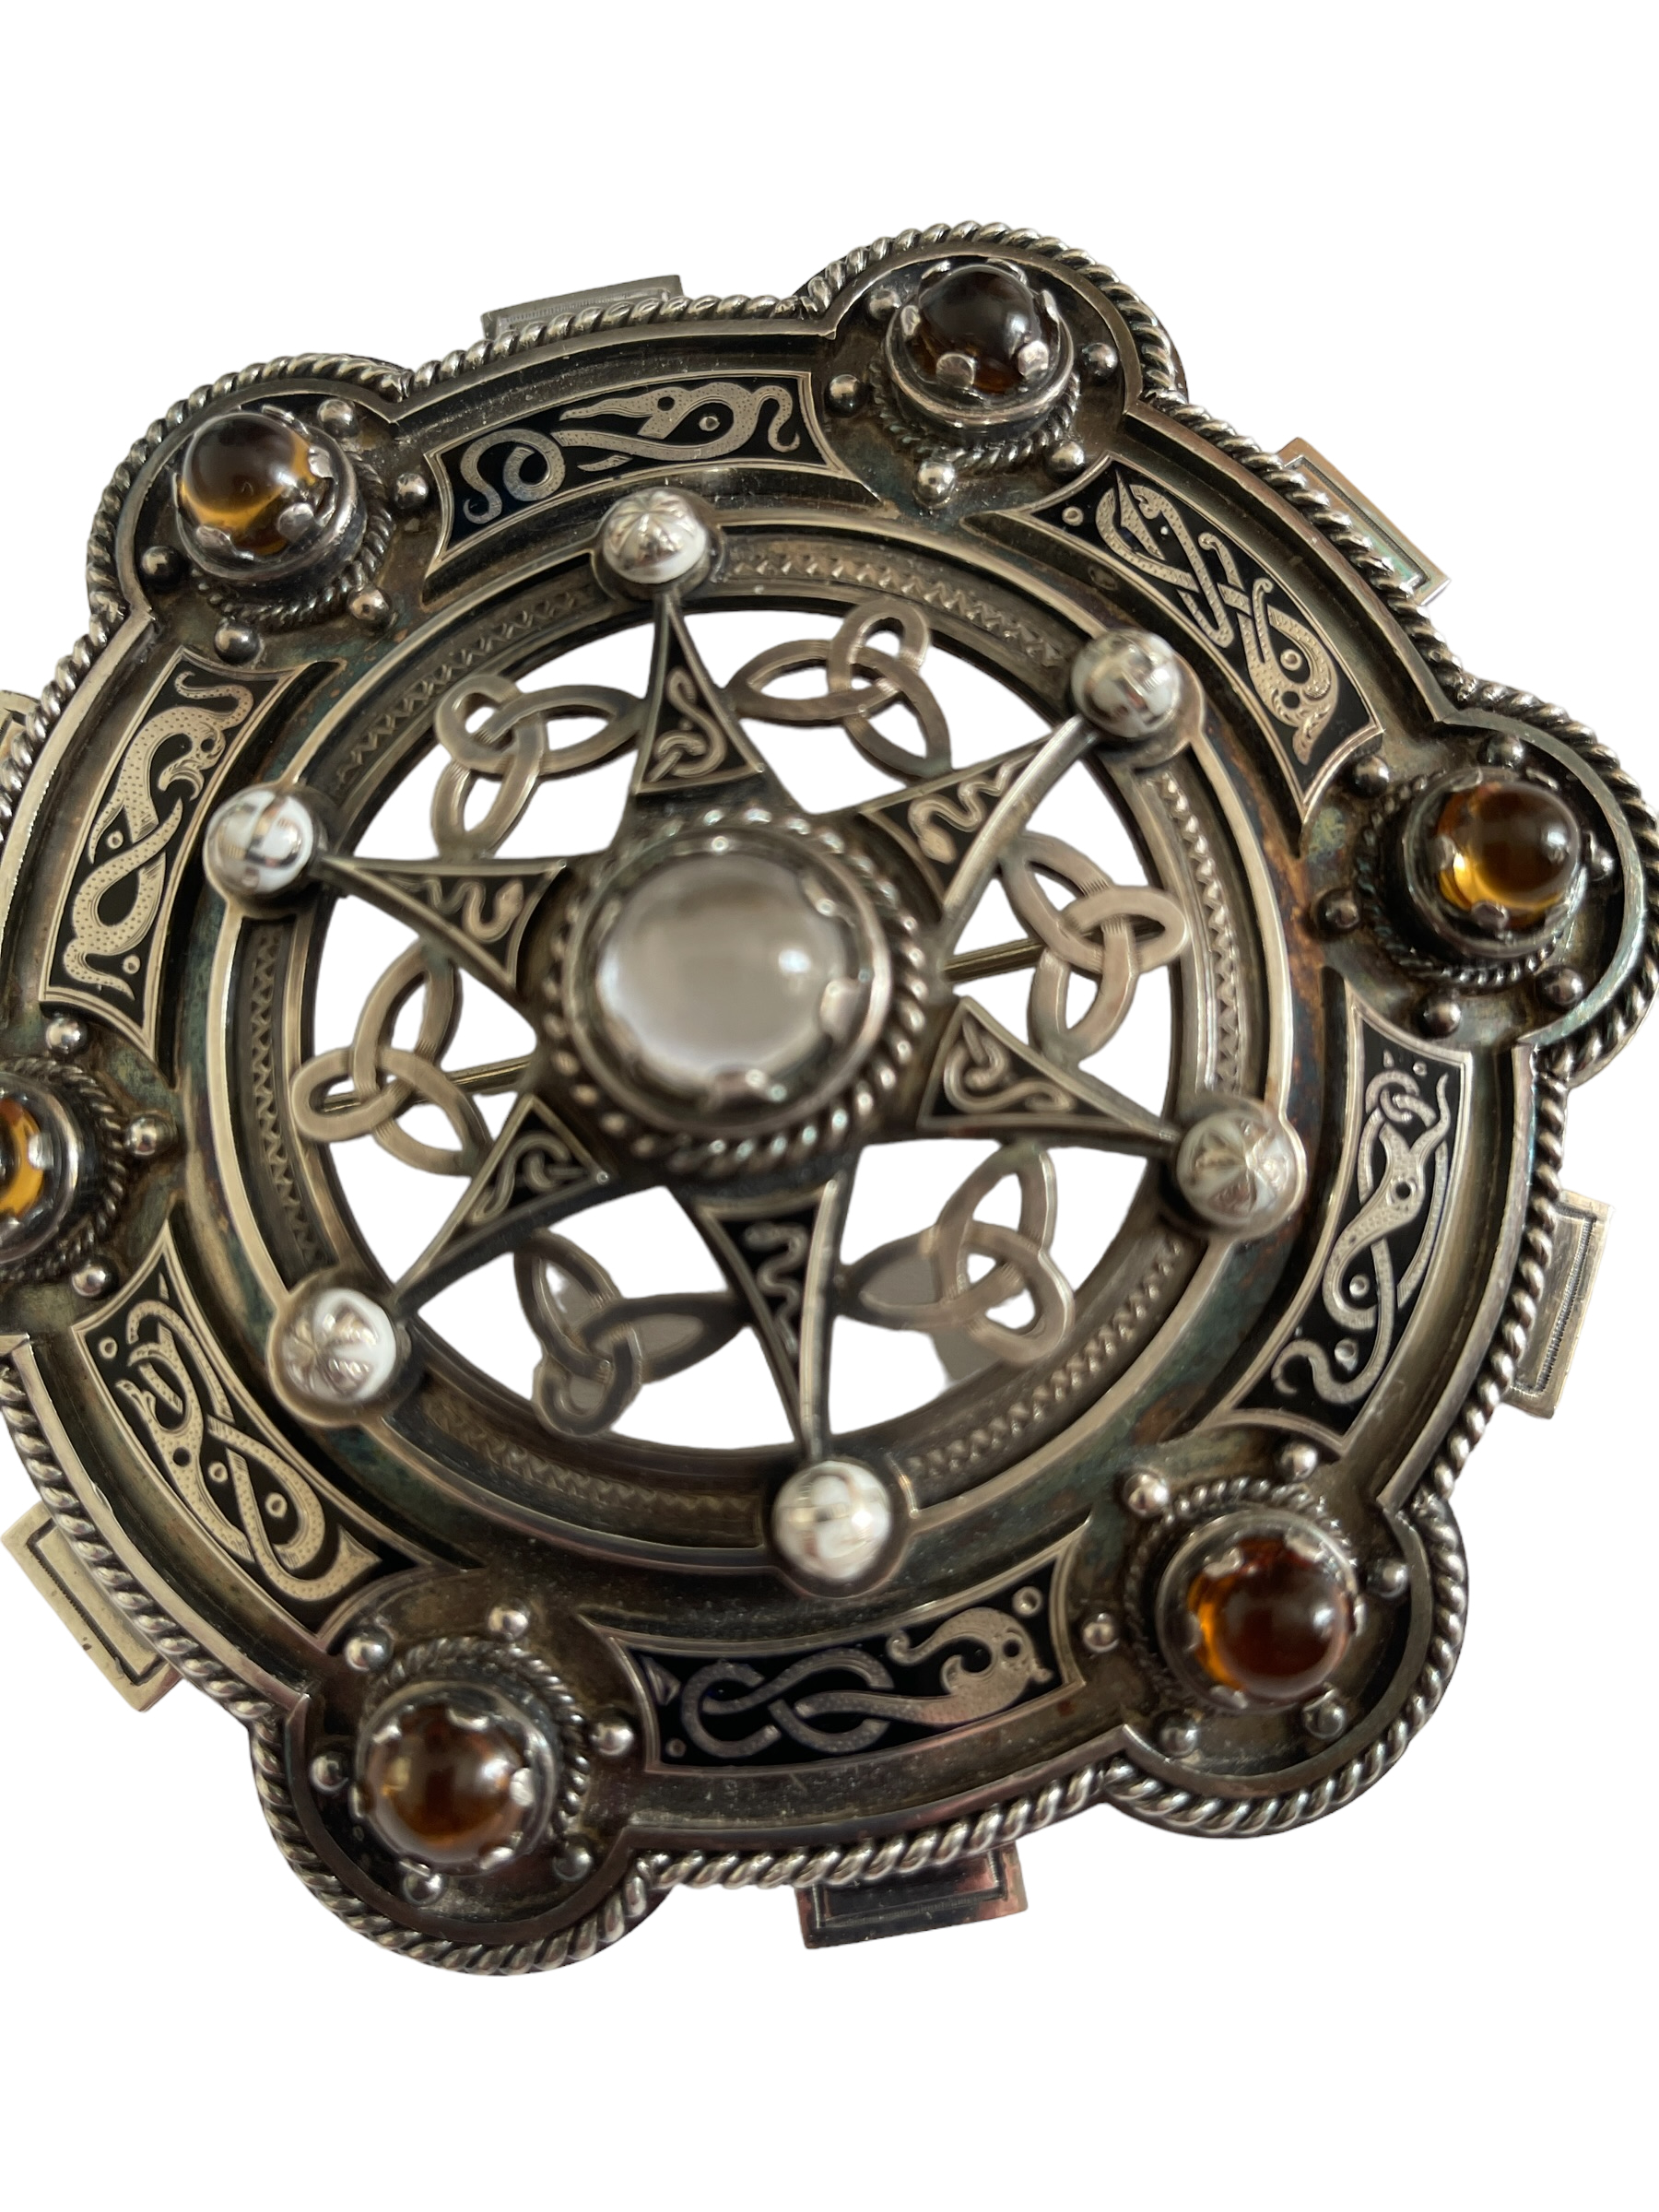 Large Important Antique Scottish Silver and Gemstone Brooch - 107mm dia - Cunningham Clan. - Image 2 of 8